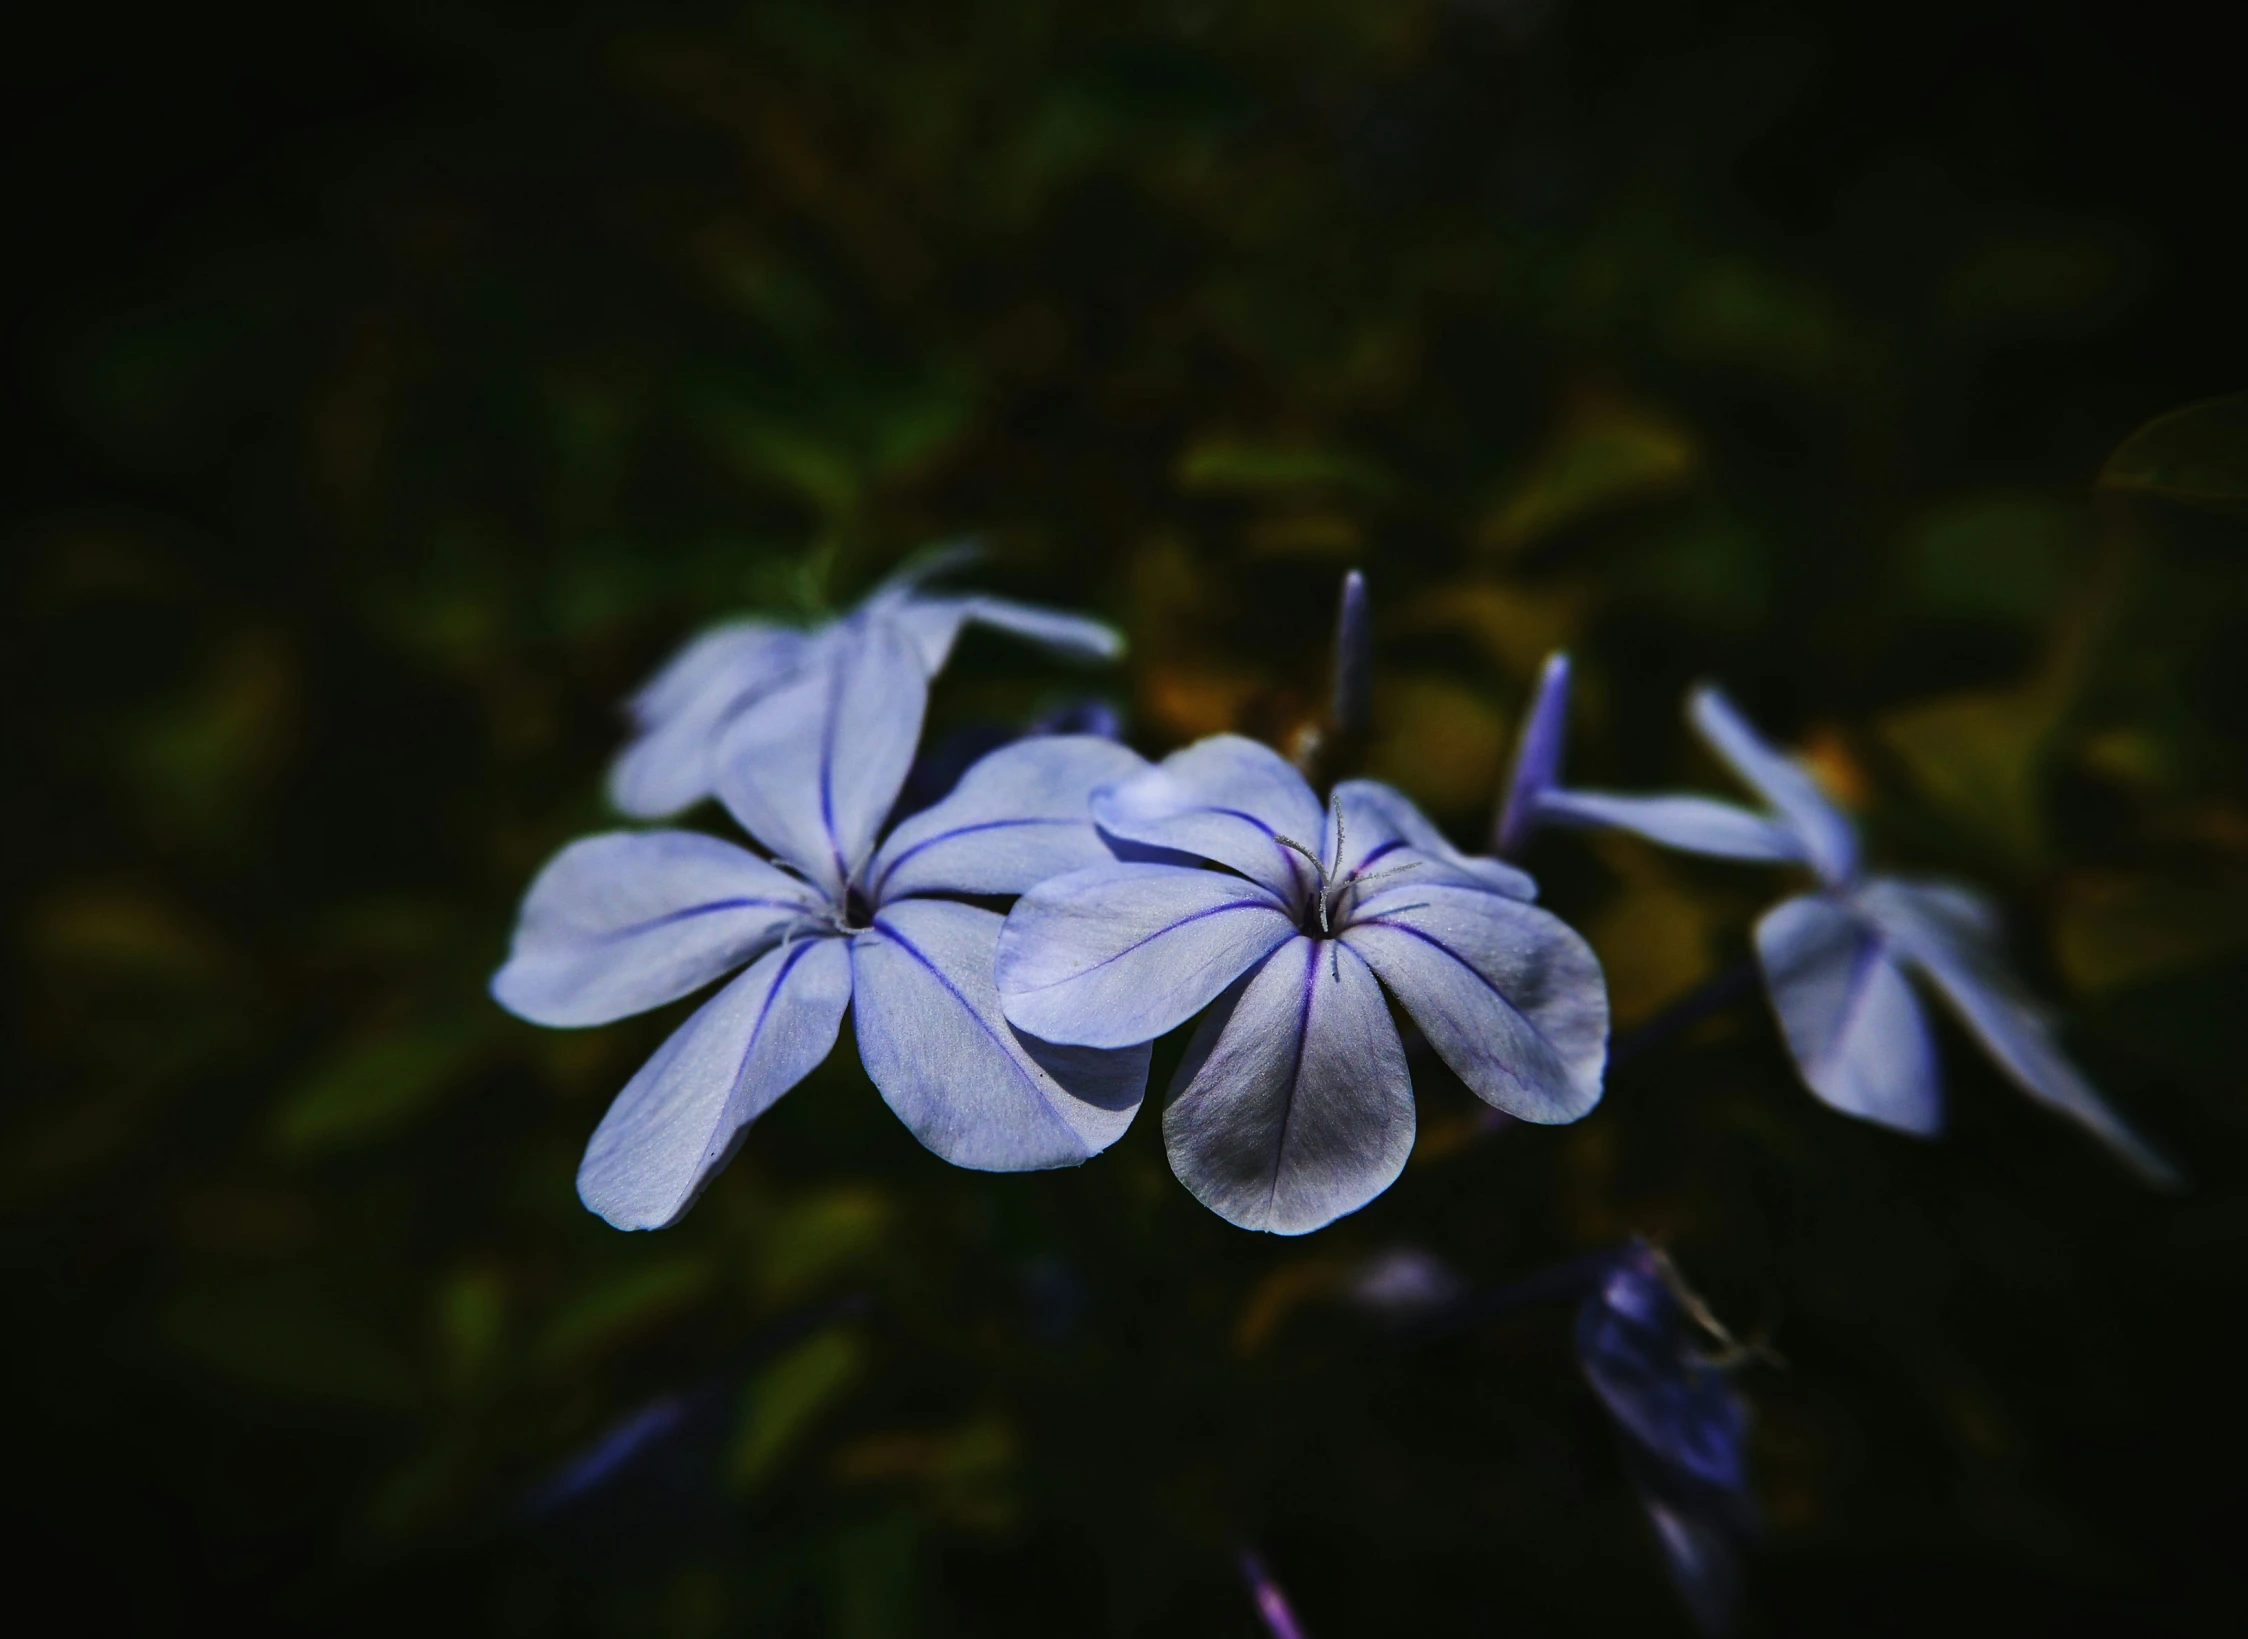 two blue flowers with a green leaves behind them